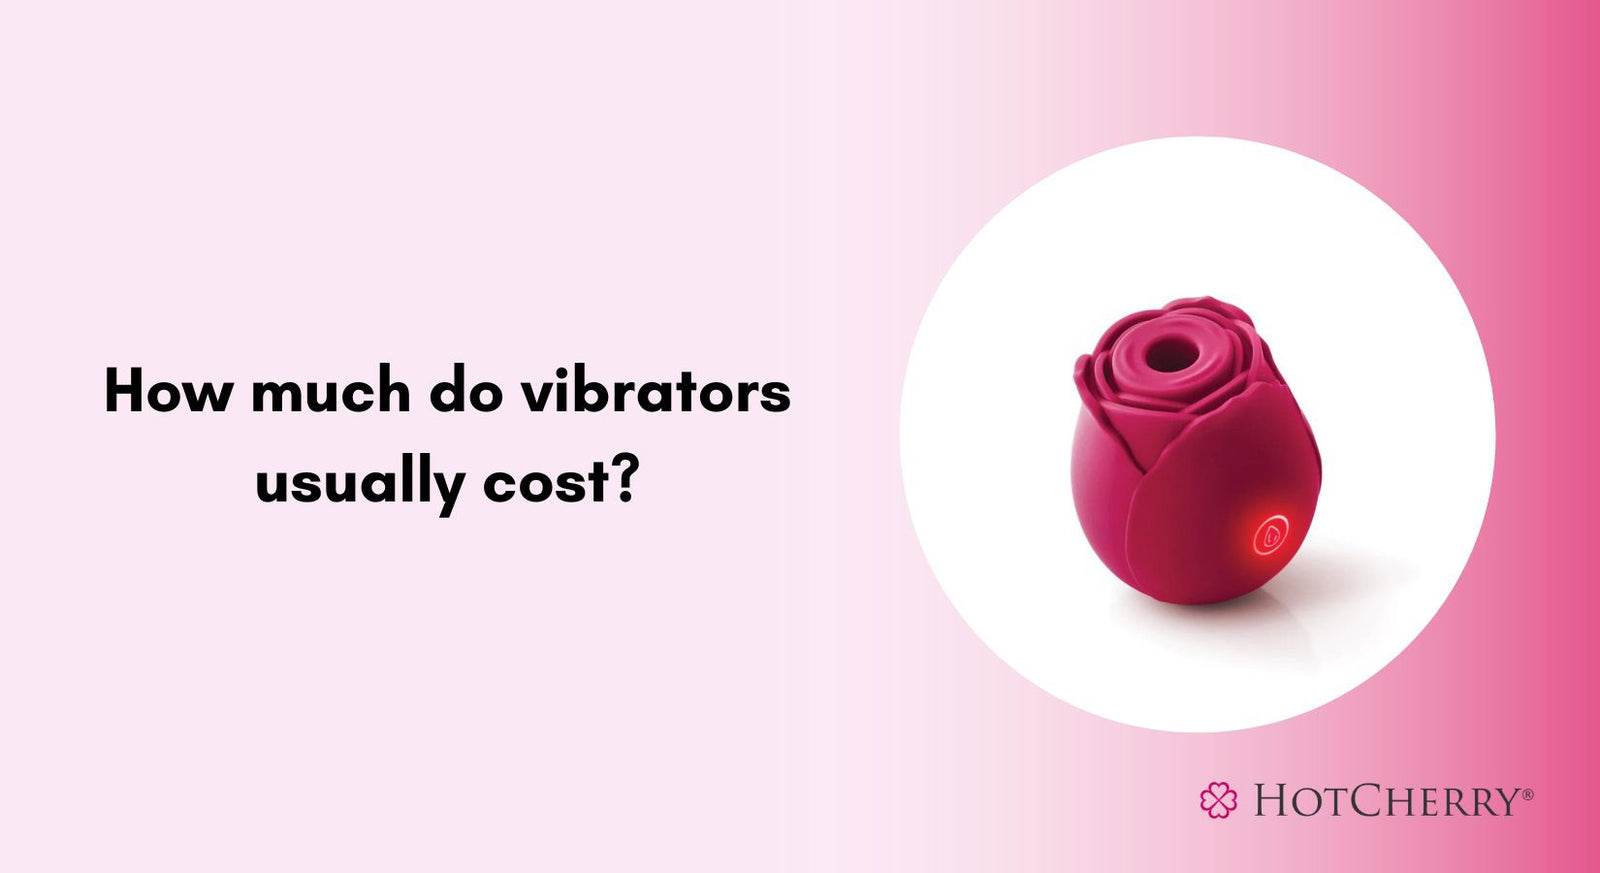 Quality Vibrator Prices: How Much Should I Spend on a Good Vibrator?